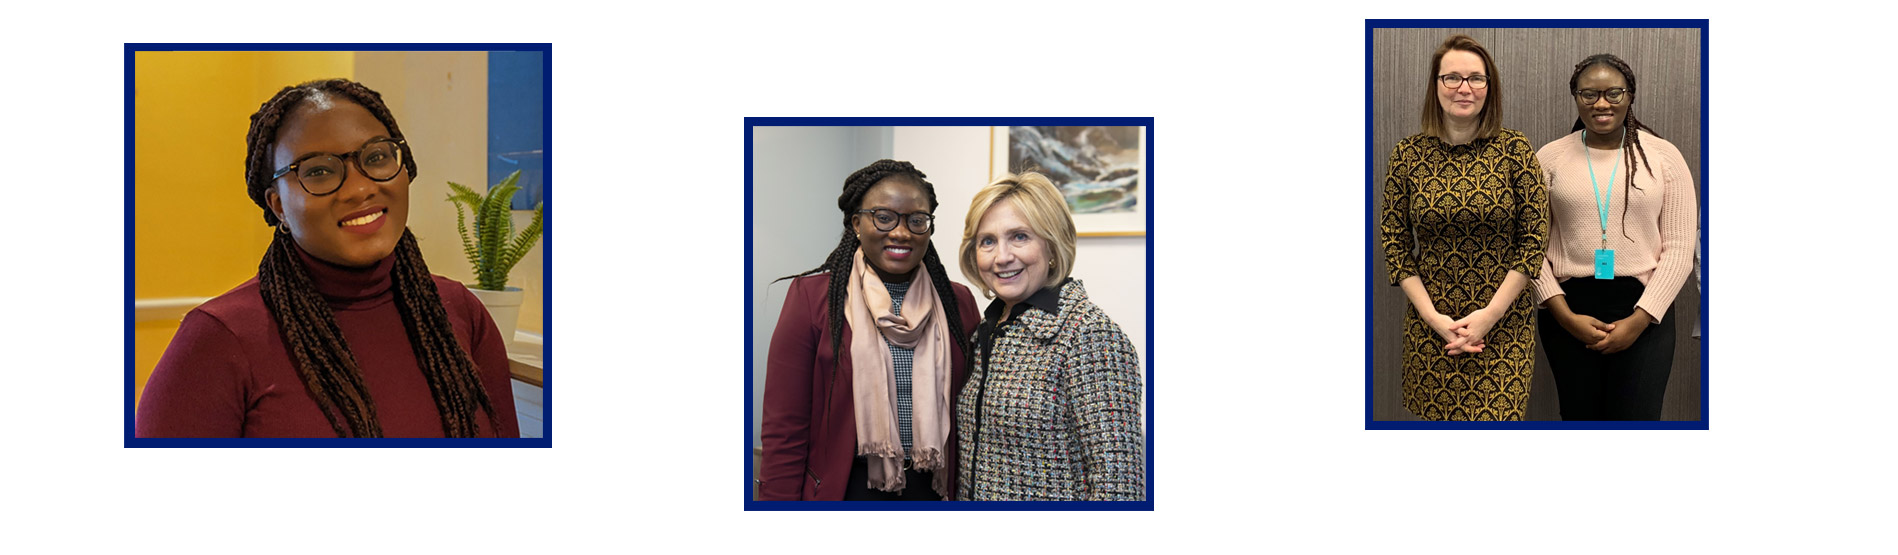 Ruwadzano with hillary clinton and kirsty williams